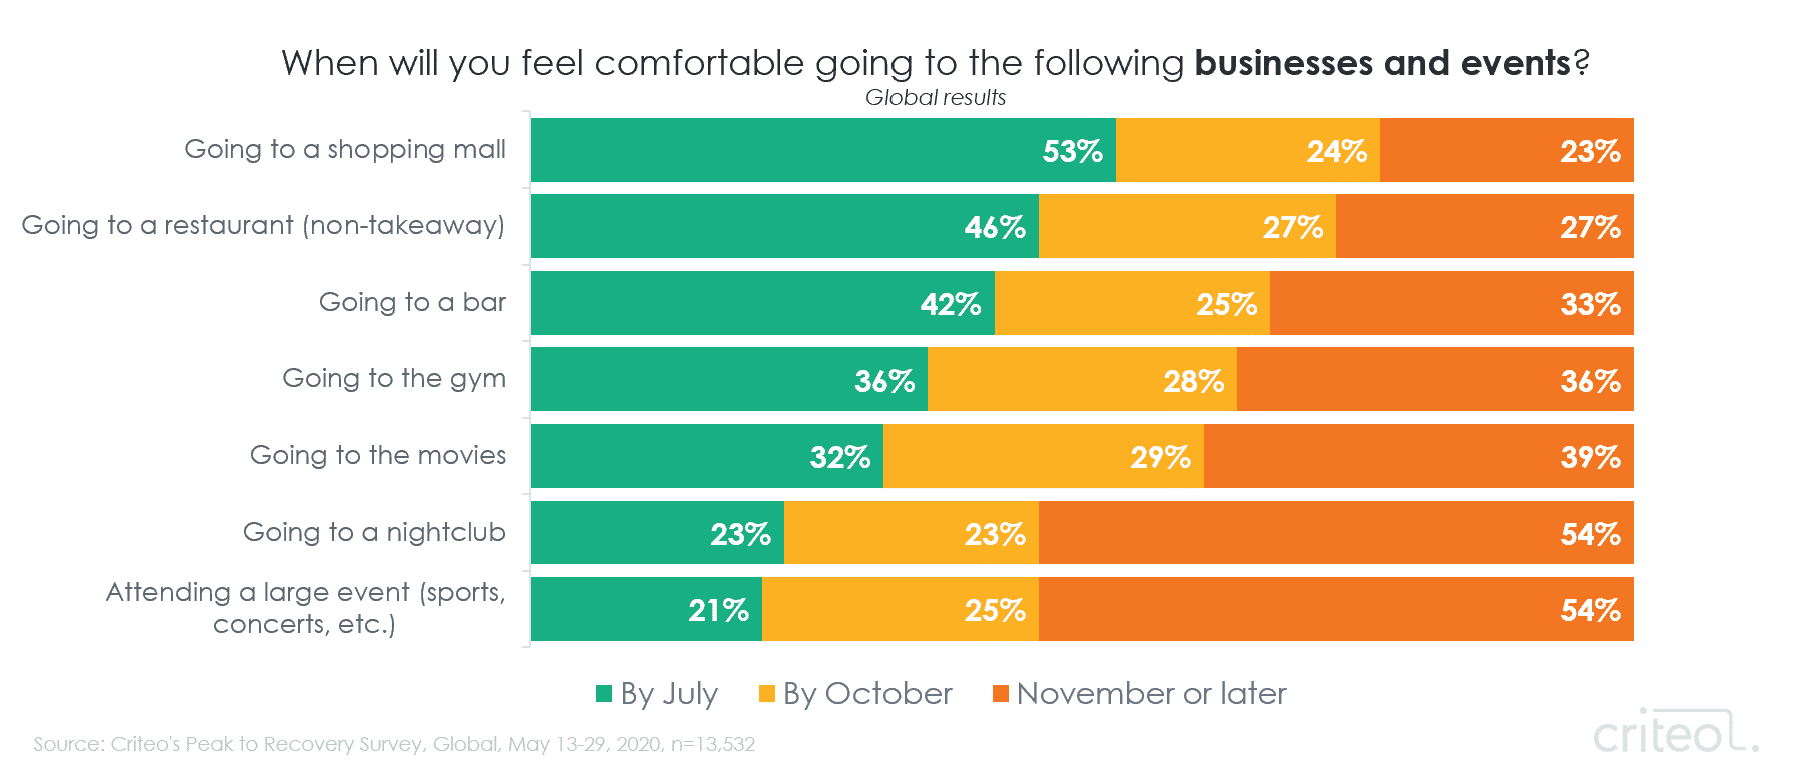 Chart. When will you feel comfortable going to the following businesses and events? Going to a shopping mall. Going to a restaurant non-takeaway. Going to a bar. Going to the gym. Going to the movies. Going to a nightclub. Attending a large event sports concerts etc.